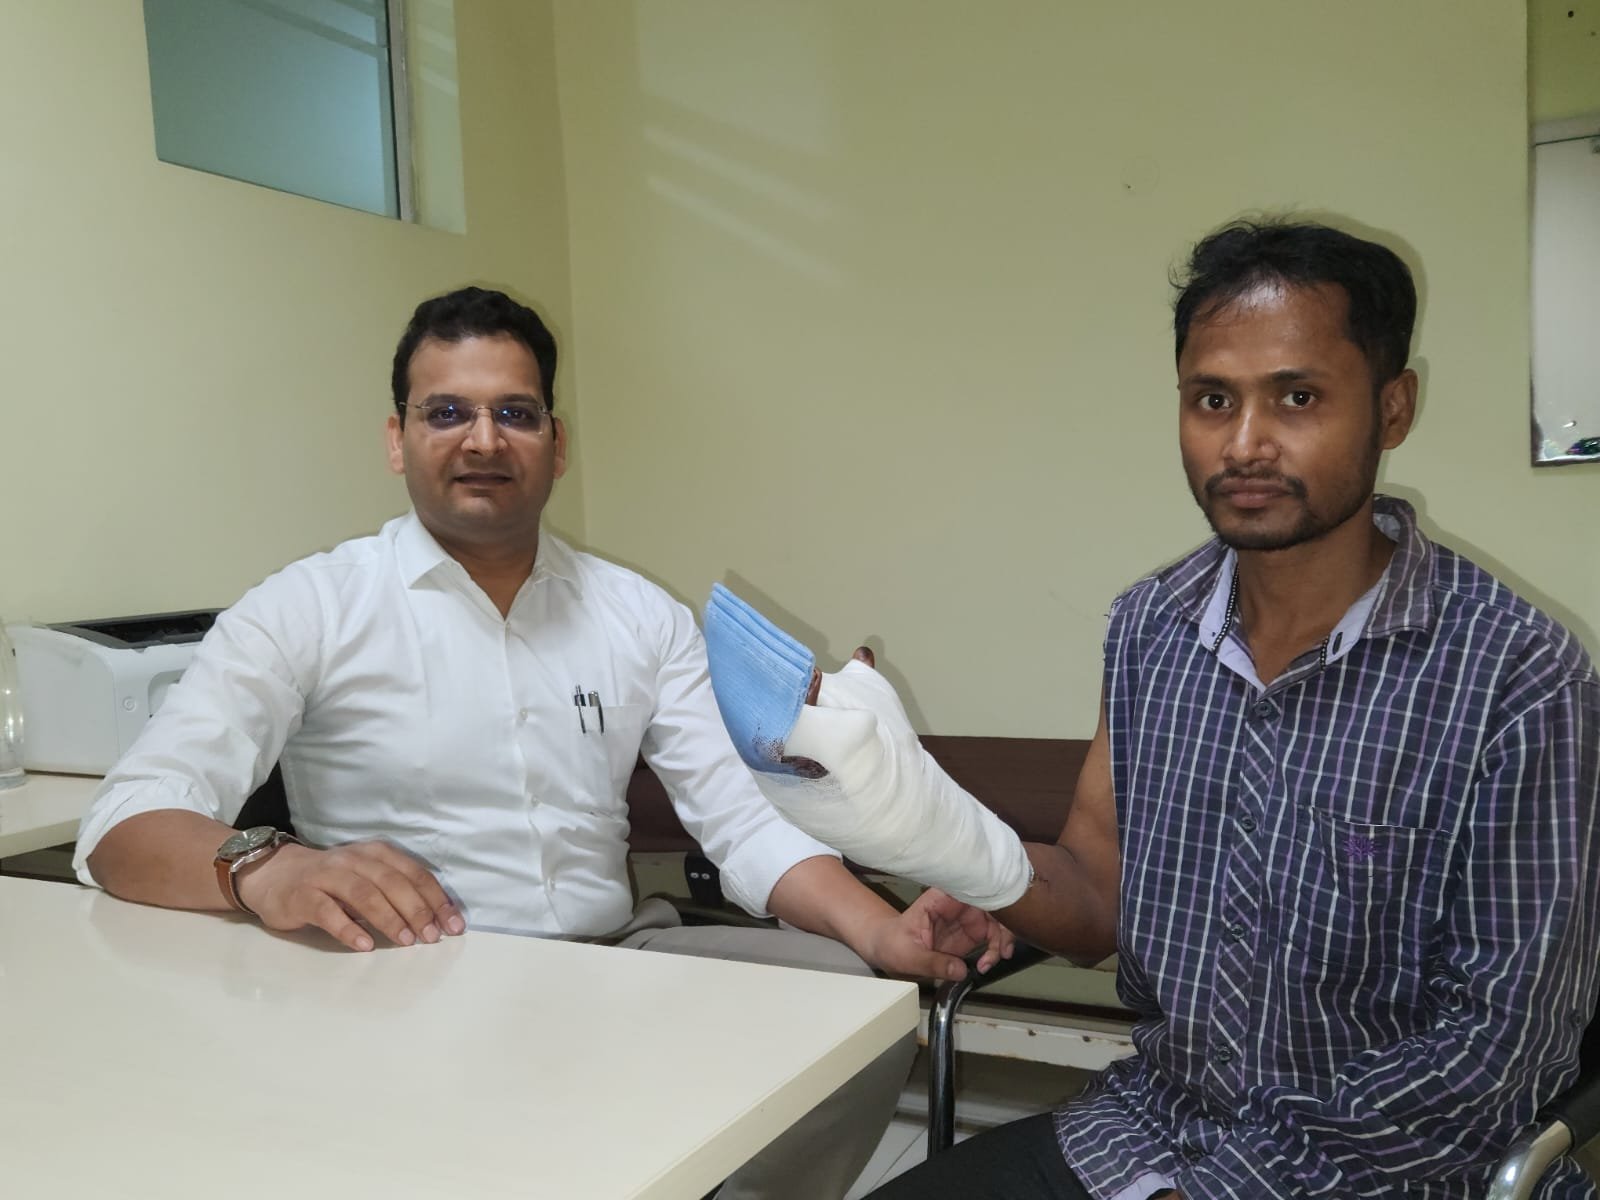 Dr. Akhilesh K. Agarwal, Senior Consultant Plastic & Reconstructive Surgeon, Department of Plastic Surgery, Medica Superspecialty Hospital with Patient post surgery